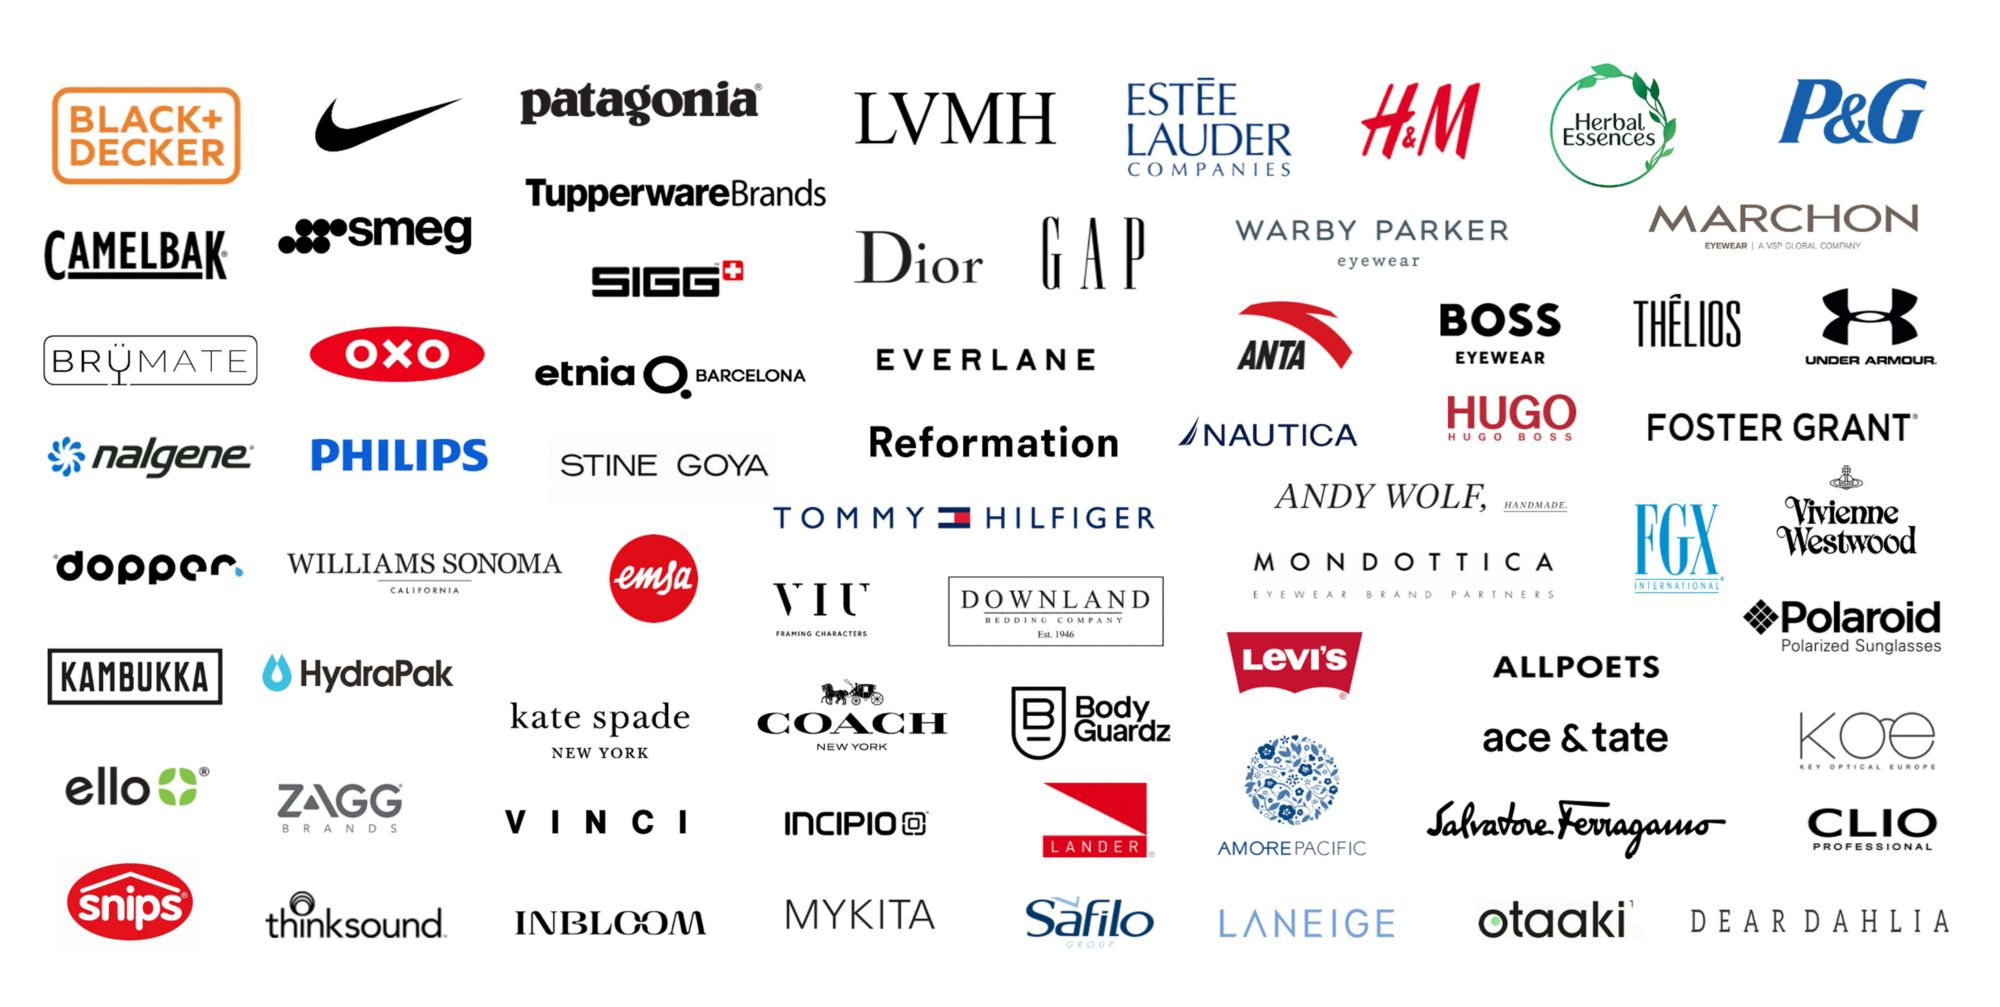 About sixty Eastman partners’ logos, including Black and Decker, Nike, Patagonia, and Proctor and Gamble 